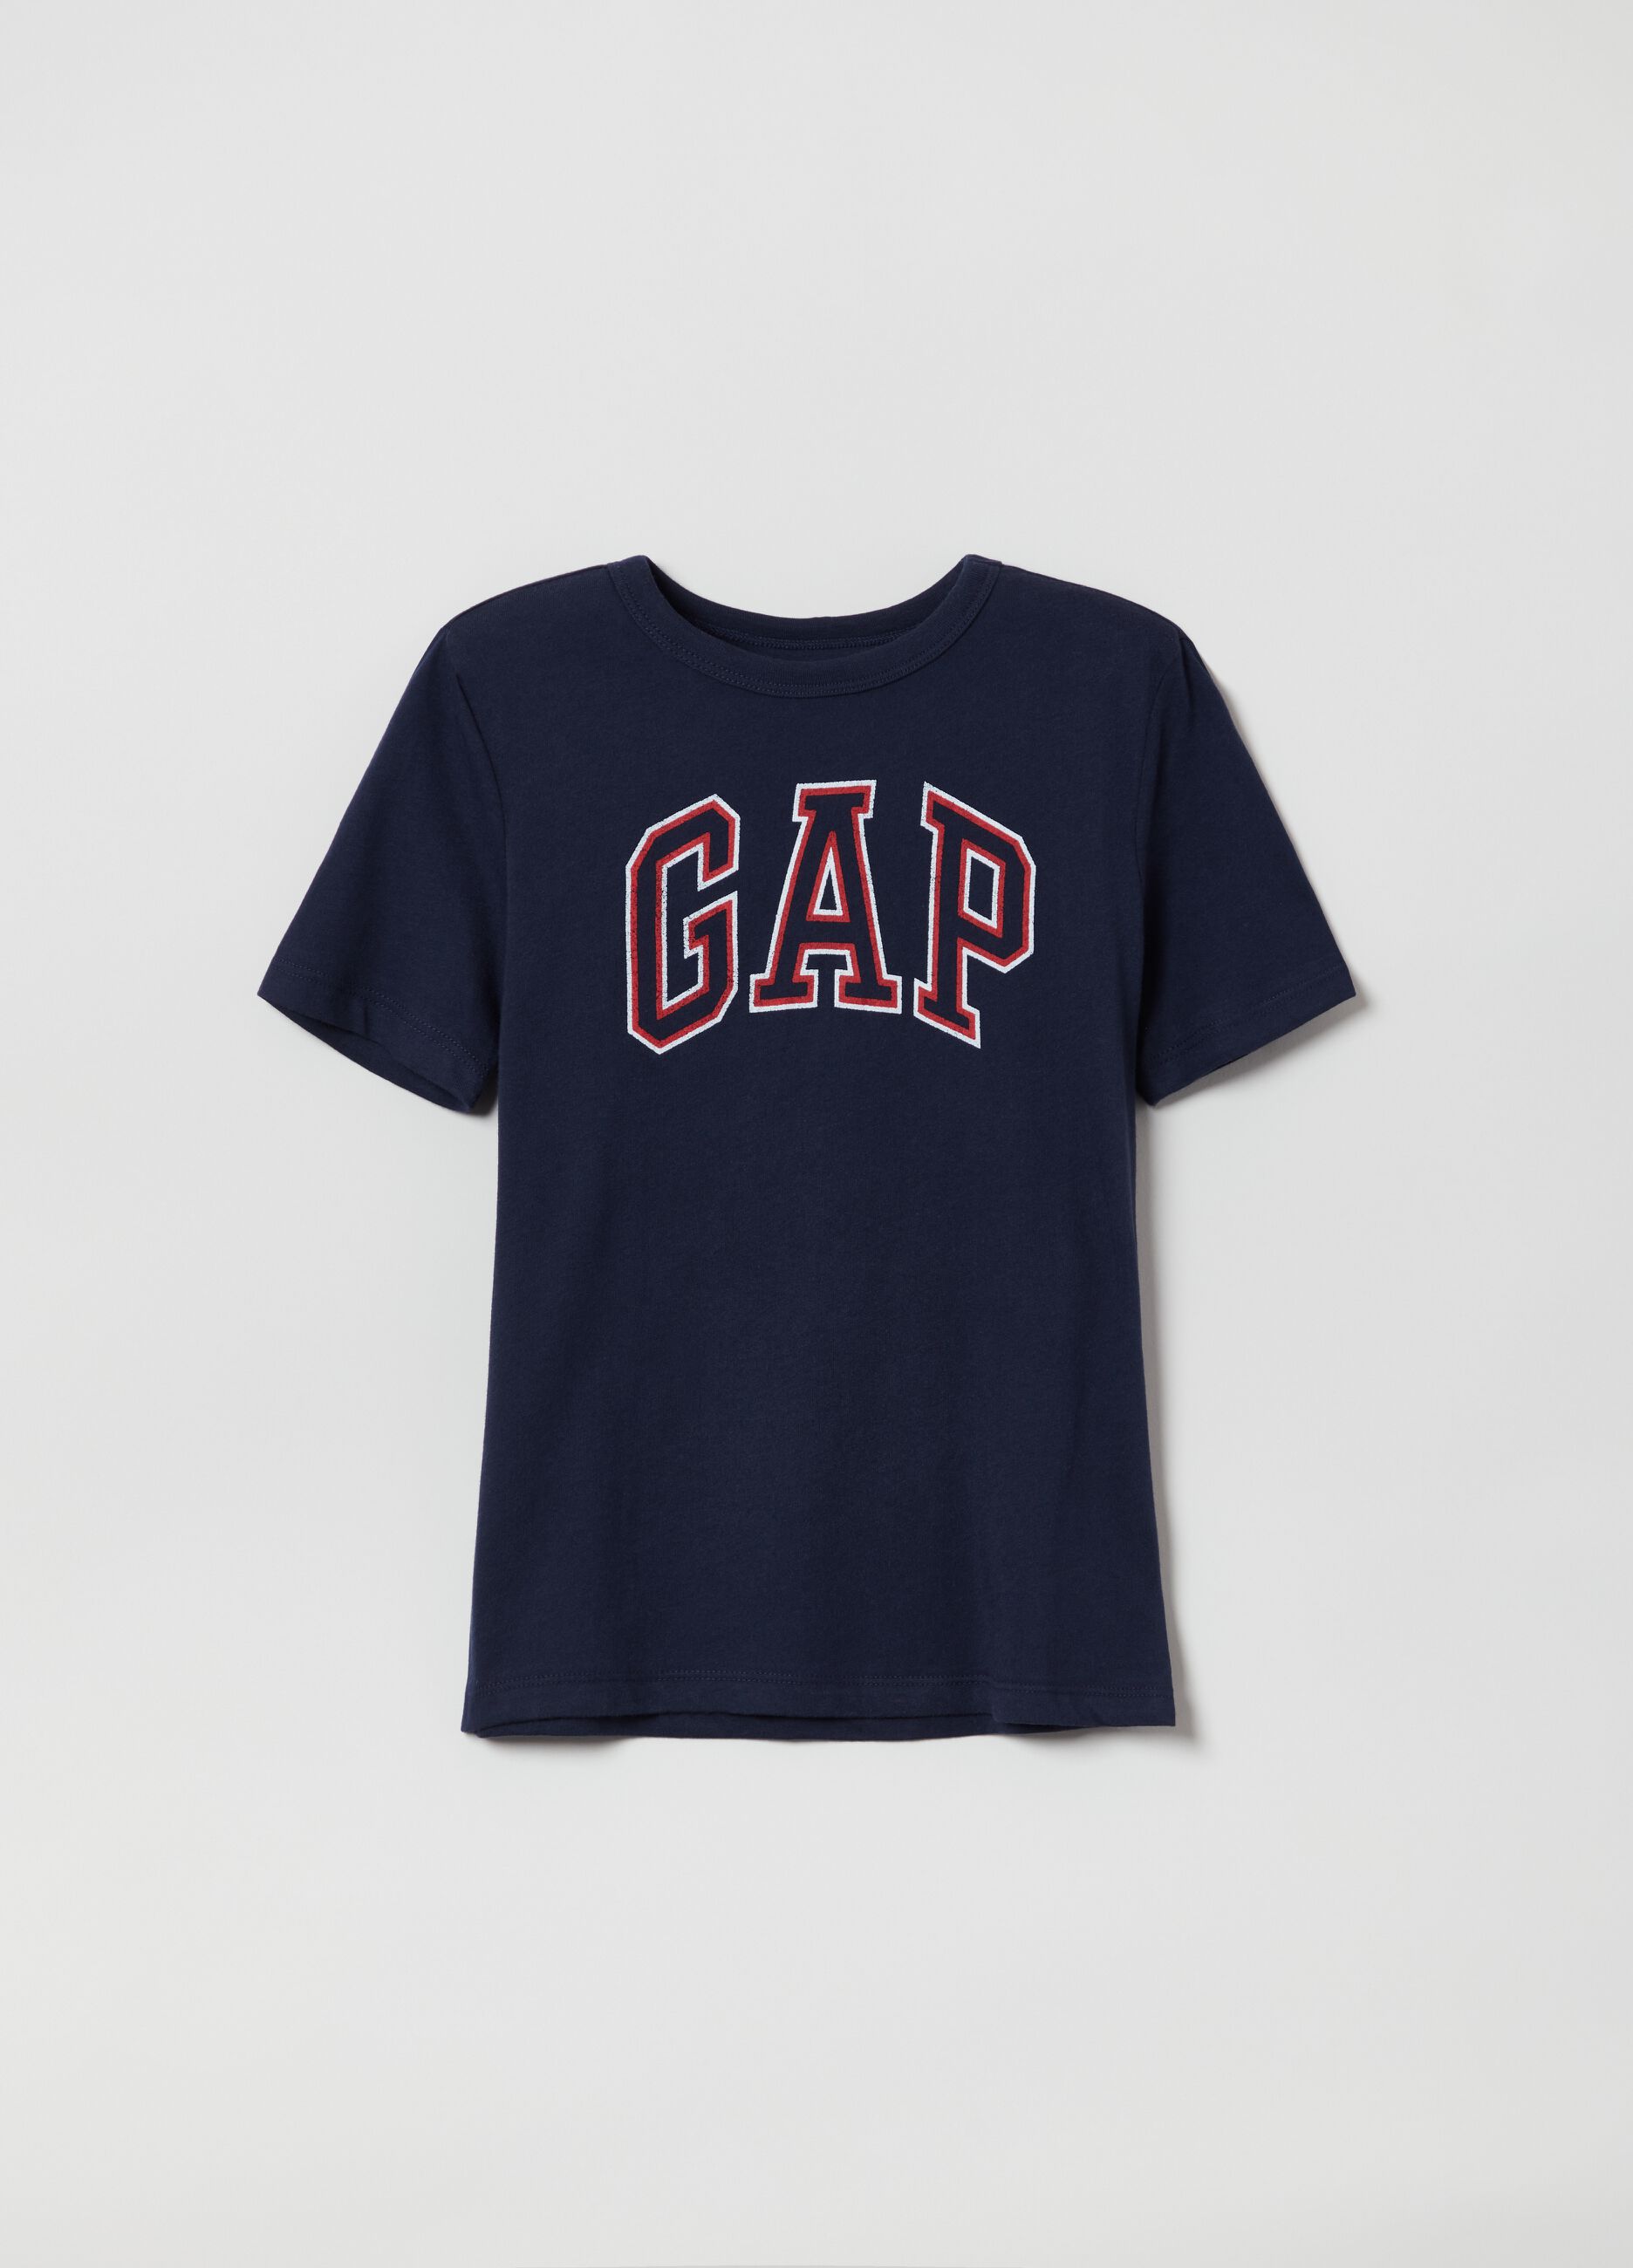 T-shirt with round neck and logo print